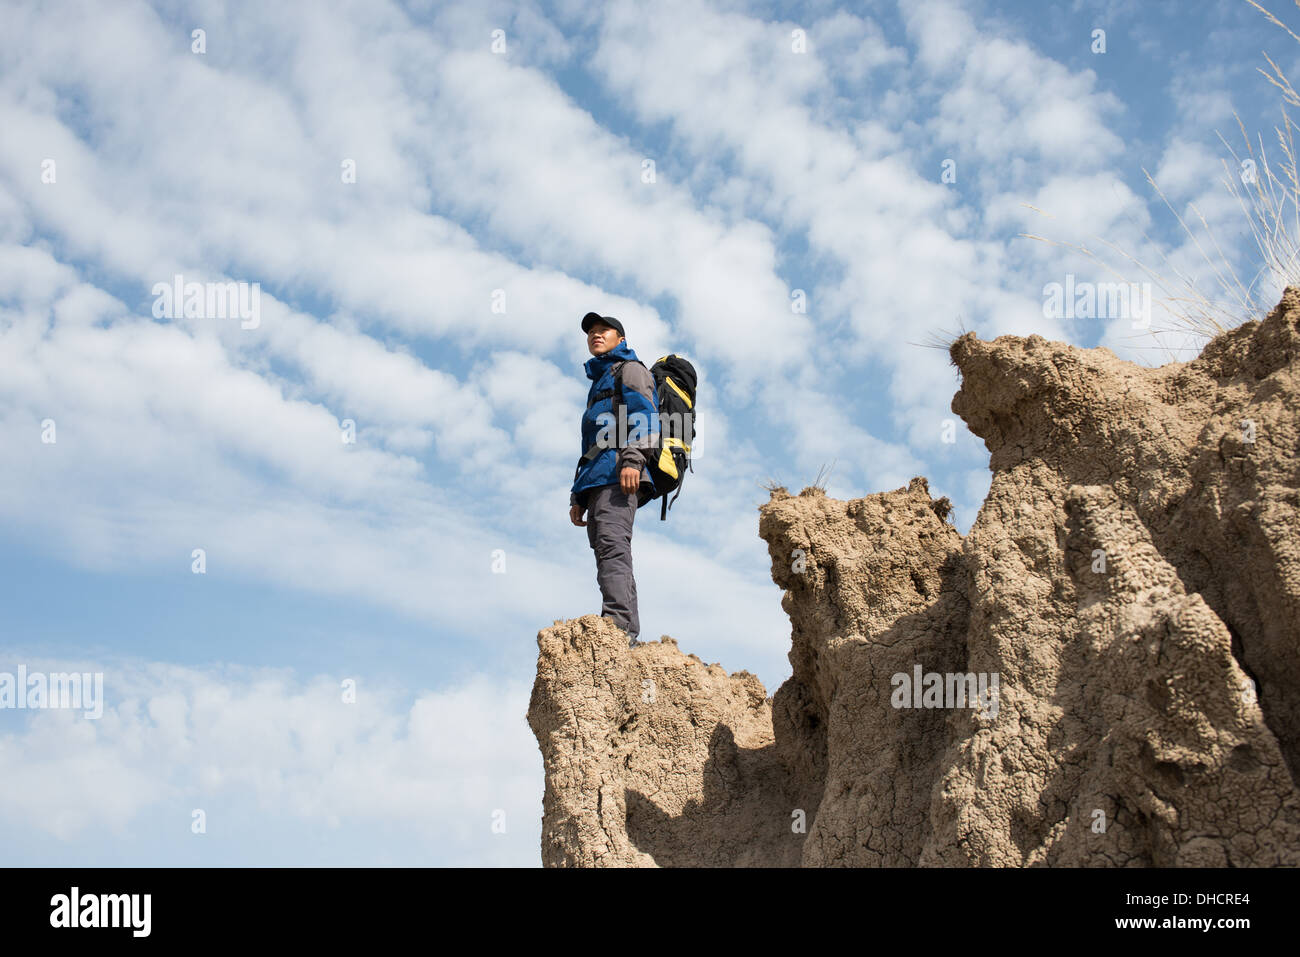 Hiker standing on a cliff overlooking. Asian Youth Stock Photo